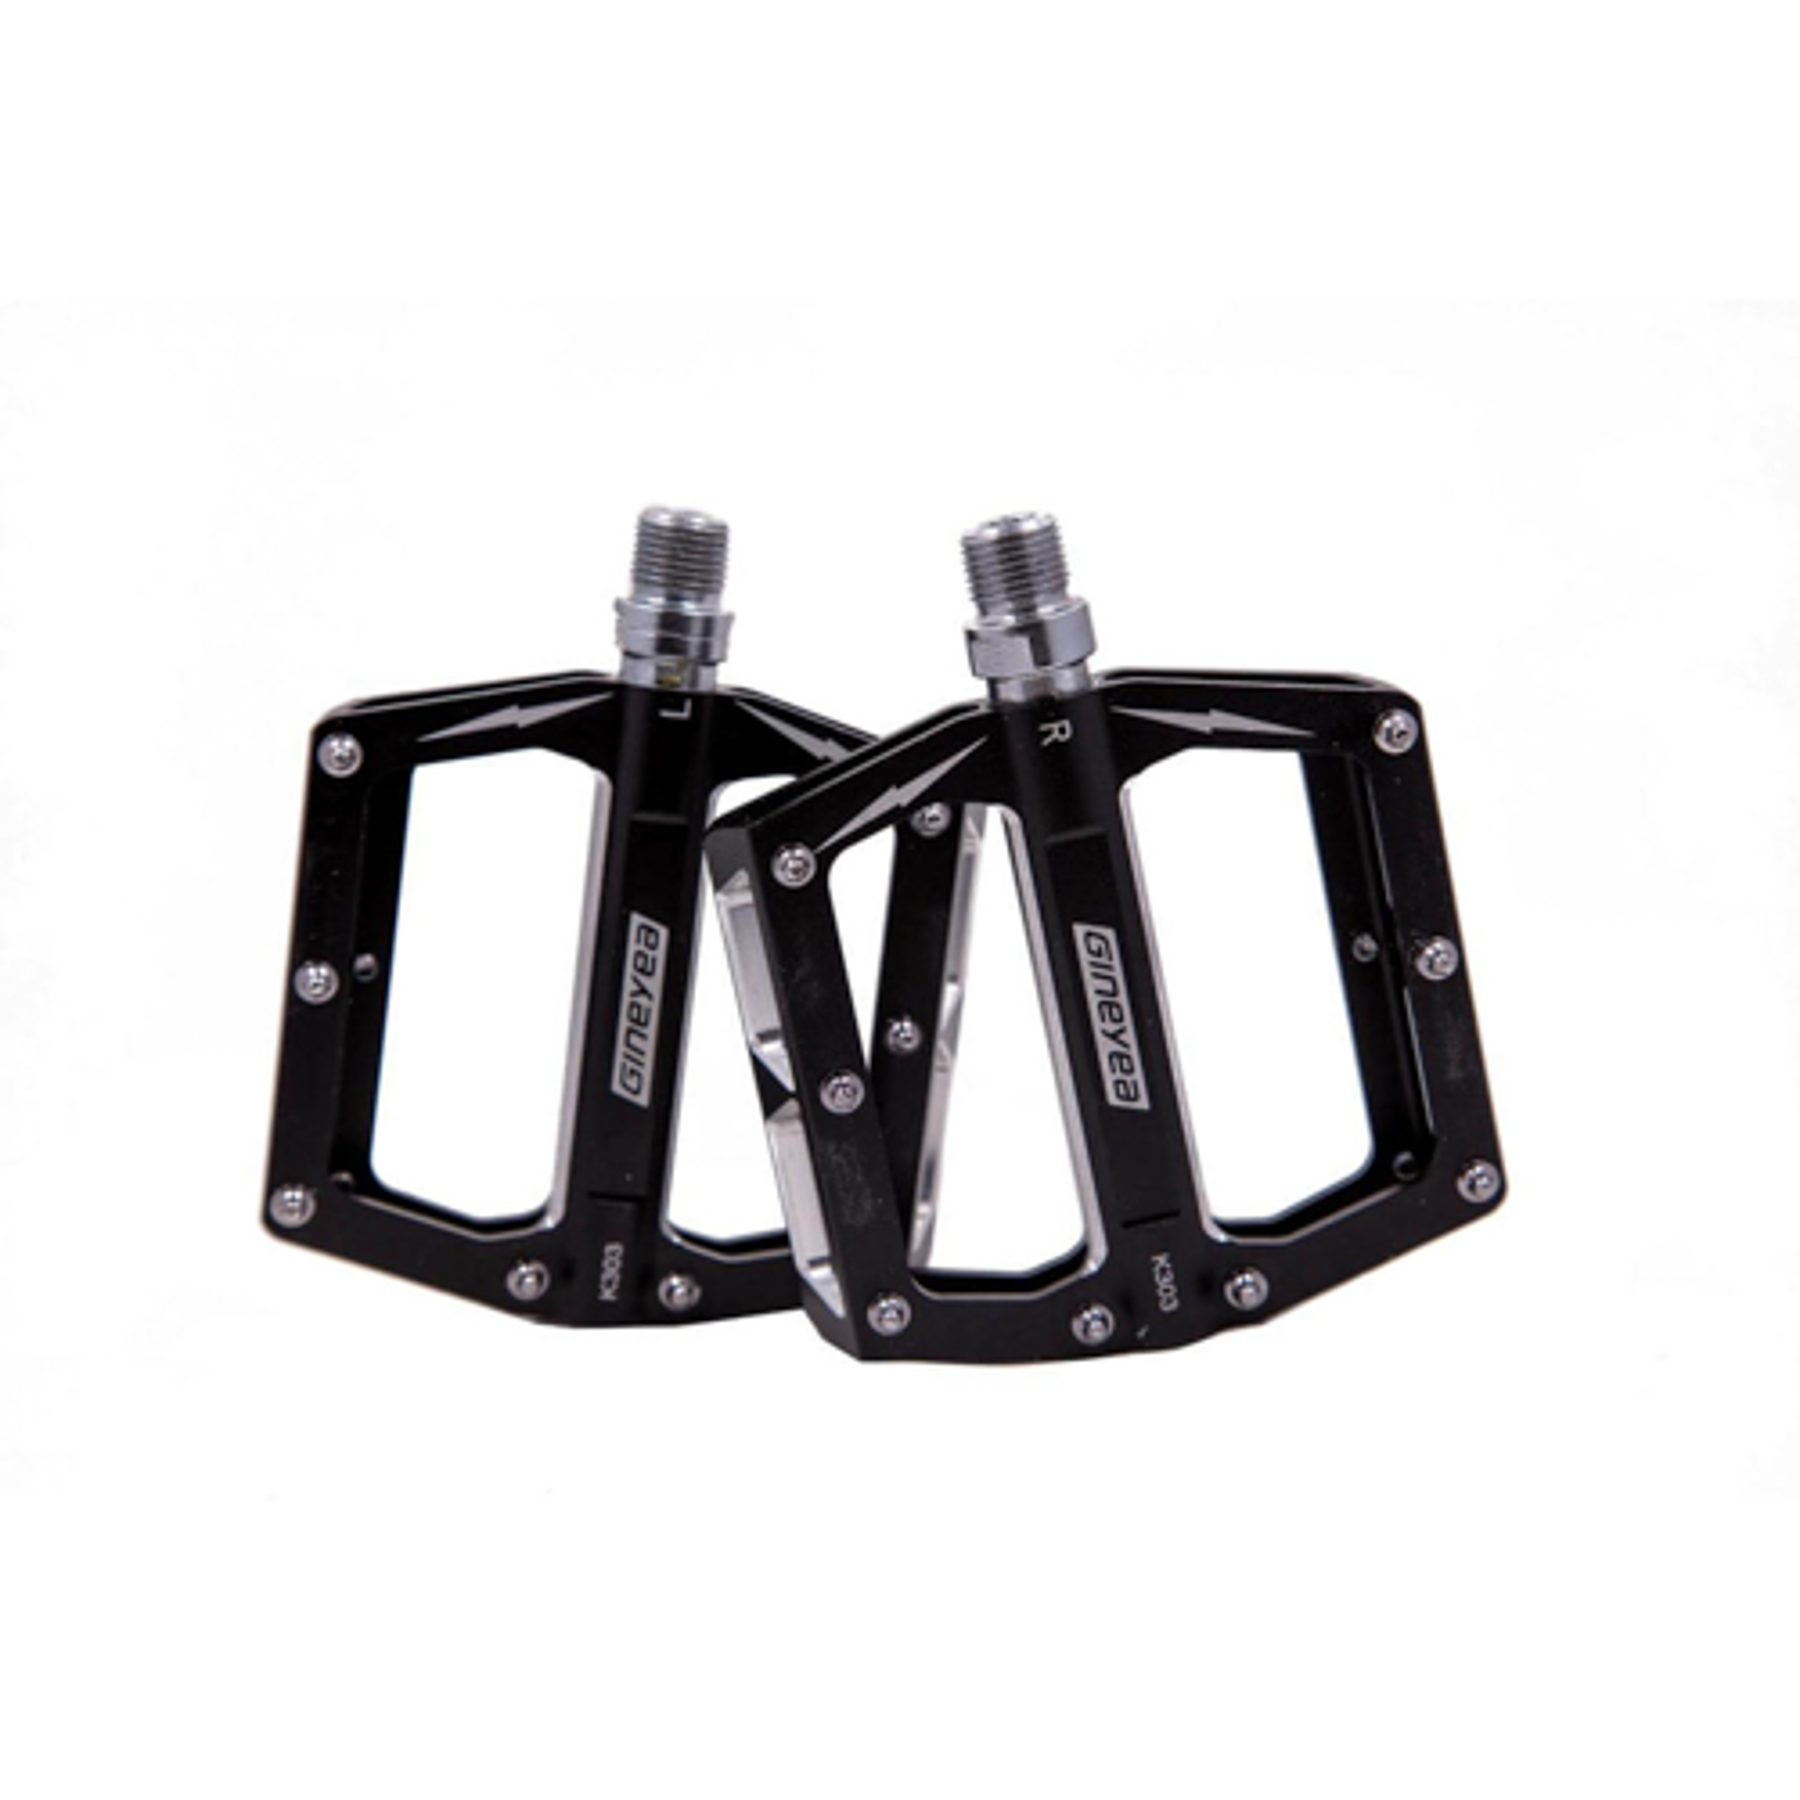 Aggressive Skid-Proof Wide Stance Pedals